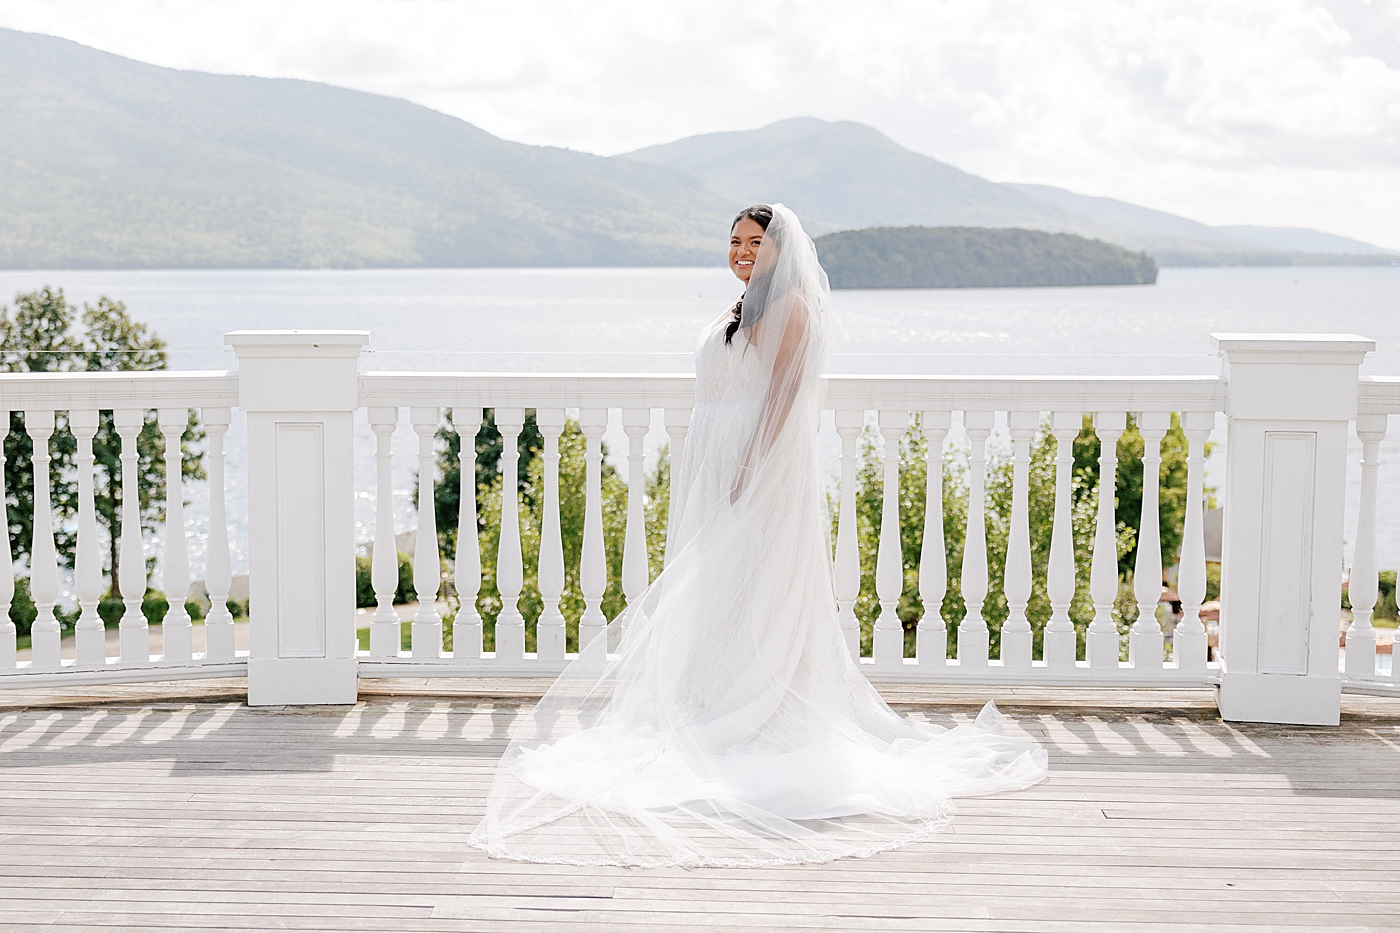 Bridal portrait of a bride on a deck with white railing and water and mountains in the background | Image by Hope Helmuth Photography